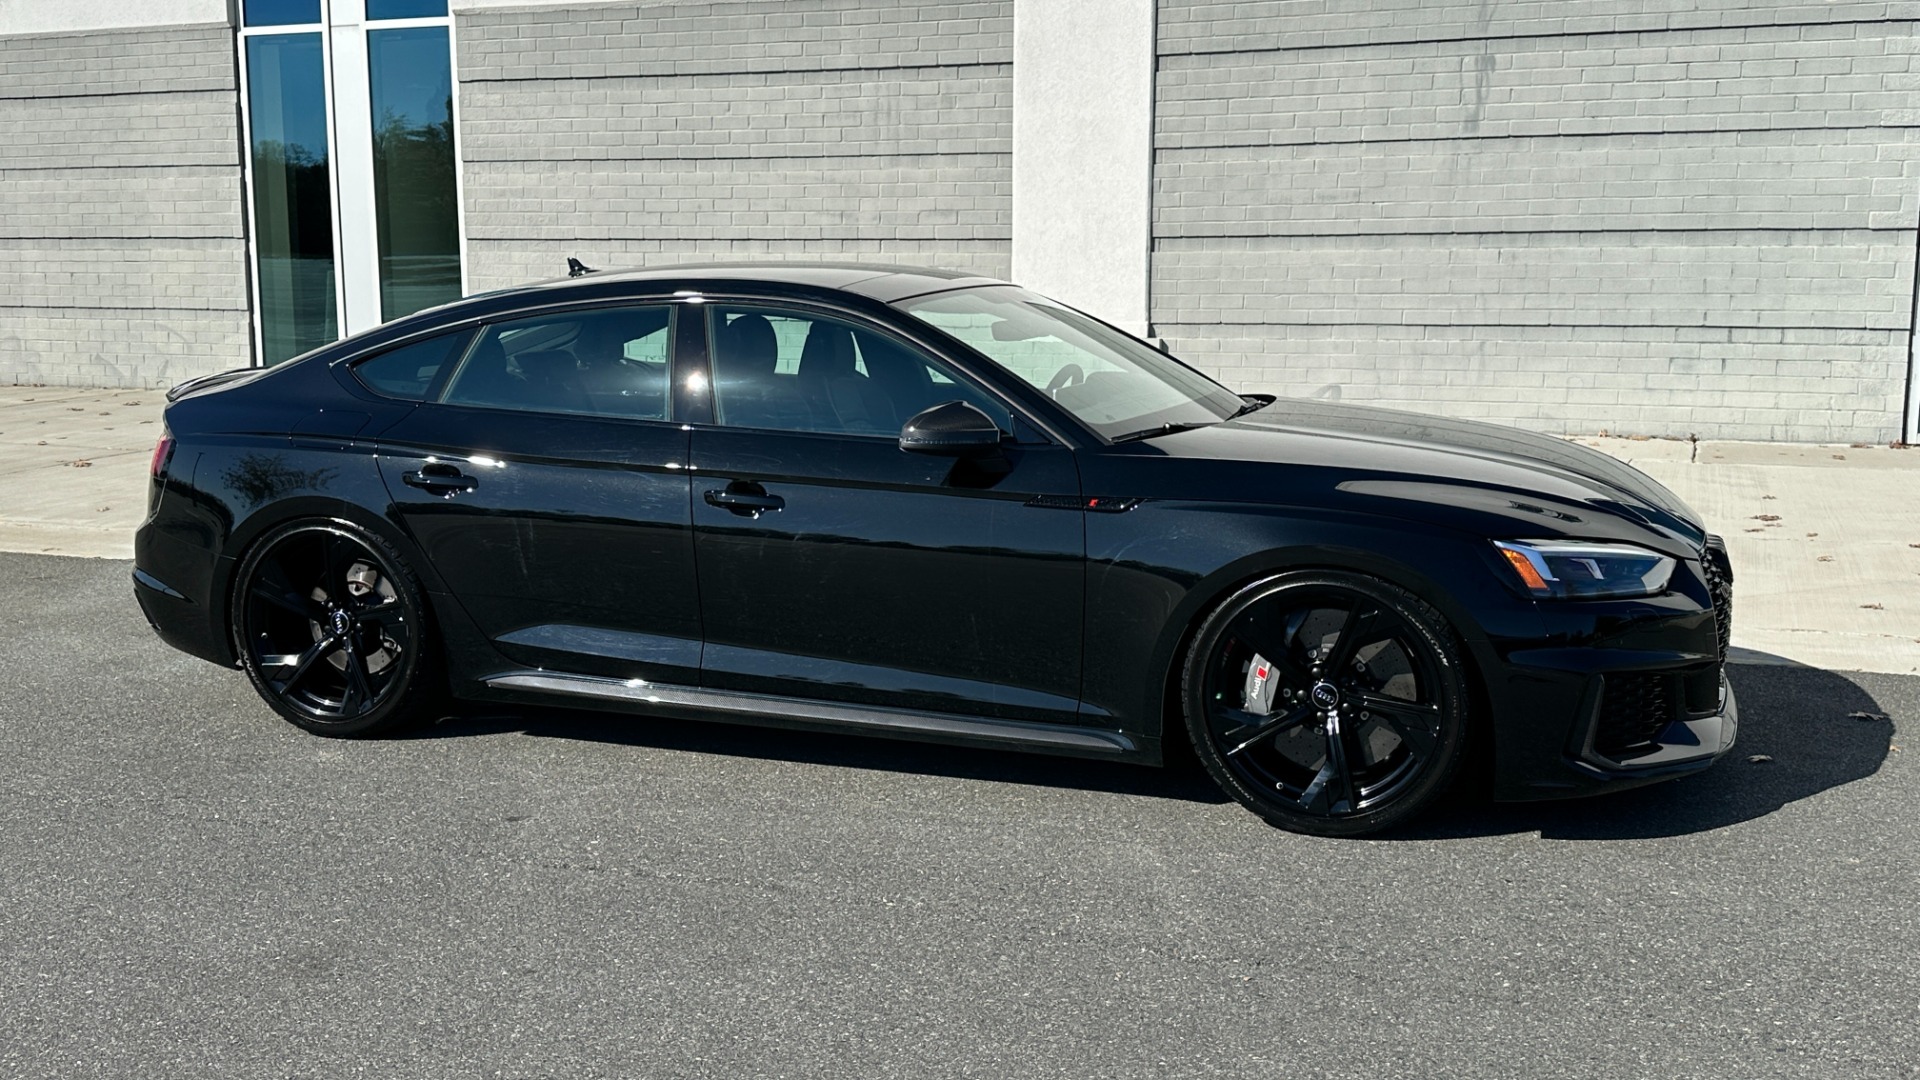 Used 2019 Audi RS 5 Sportback 2.9T QUATTRO / BLACK OPTIC / CARBON FIBER / NAPPA LEATHER / DYNAMIC PLUS for sale $71,999 at Formula Imports in Charlotte NC 28227 3